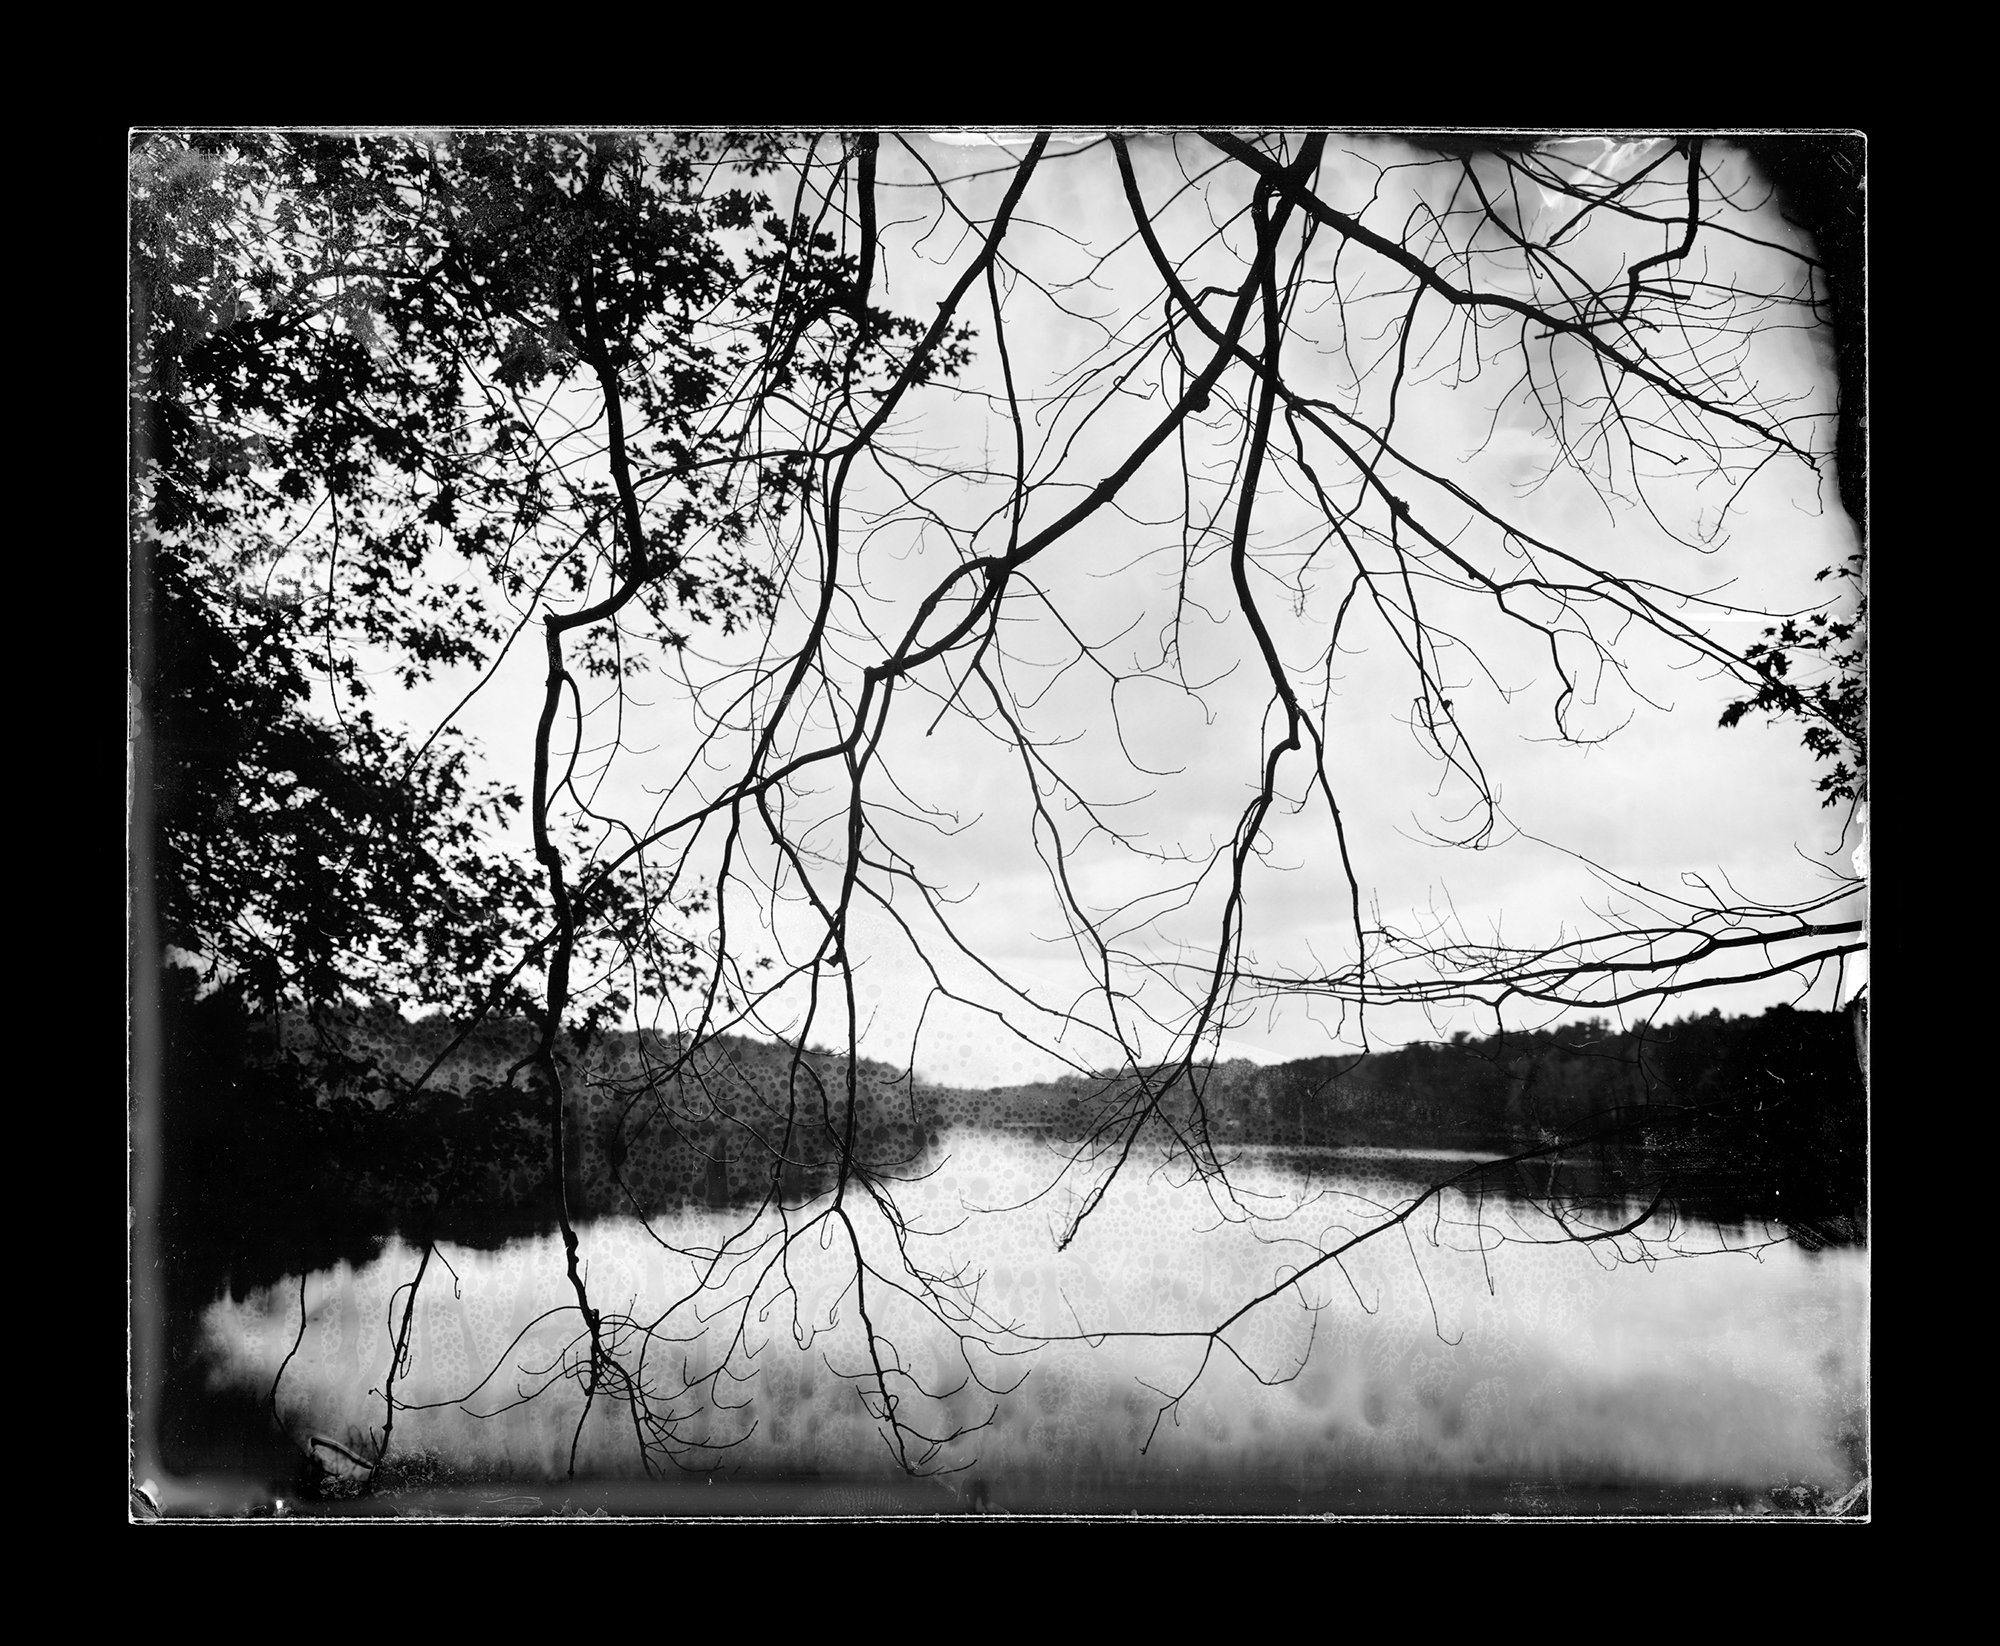   Michael Kolster,  Impoundment Above Worumbo Dam,  Durham, Maine, Androscoggin River , 2013, Ambrotype mounted to black acrylic, 8 x 10 inches    $4000   